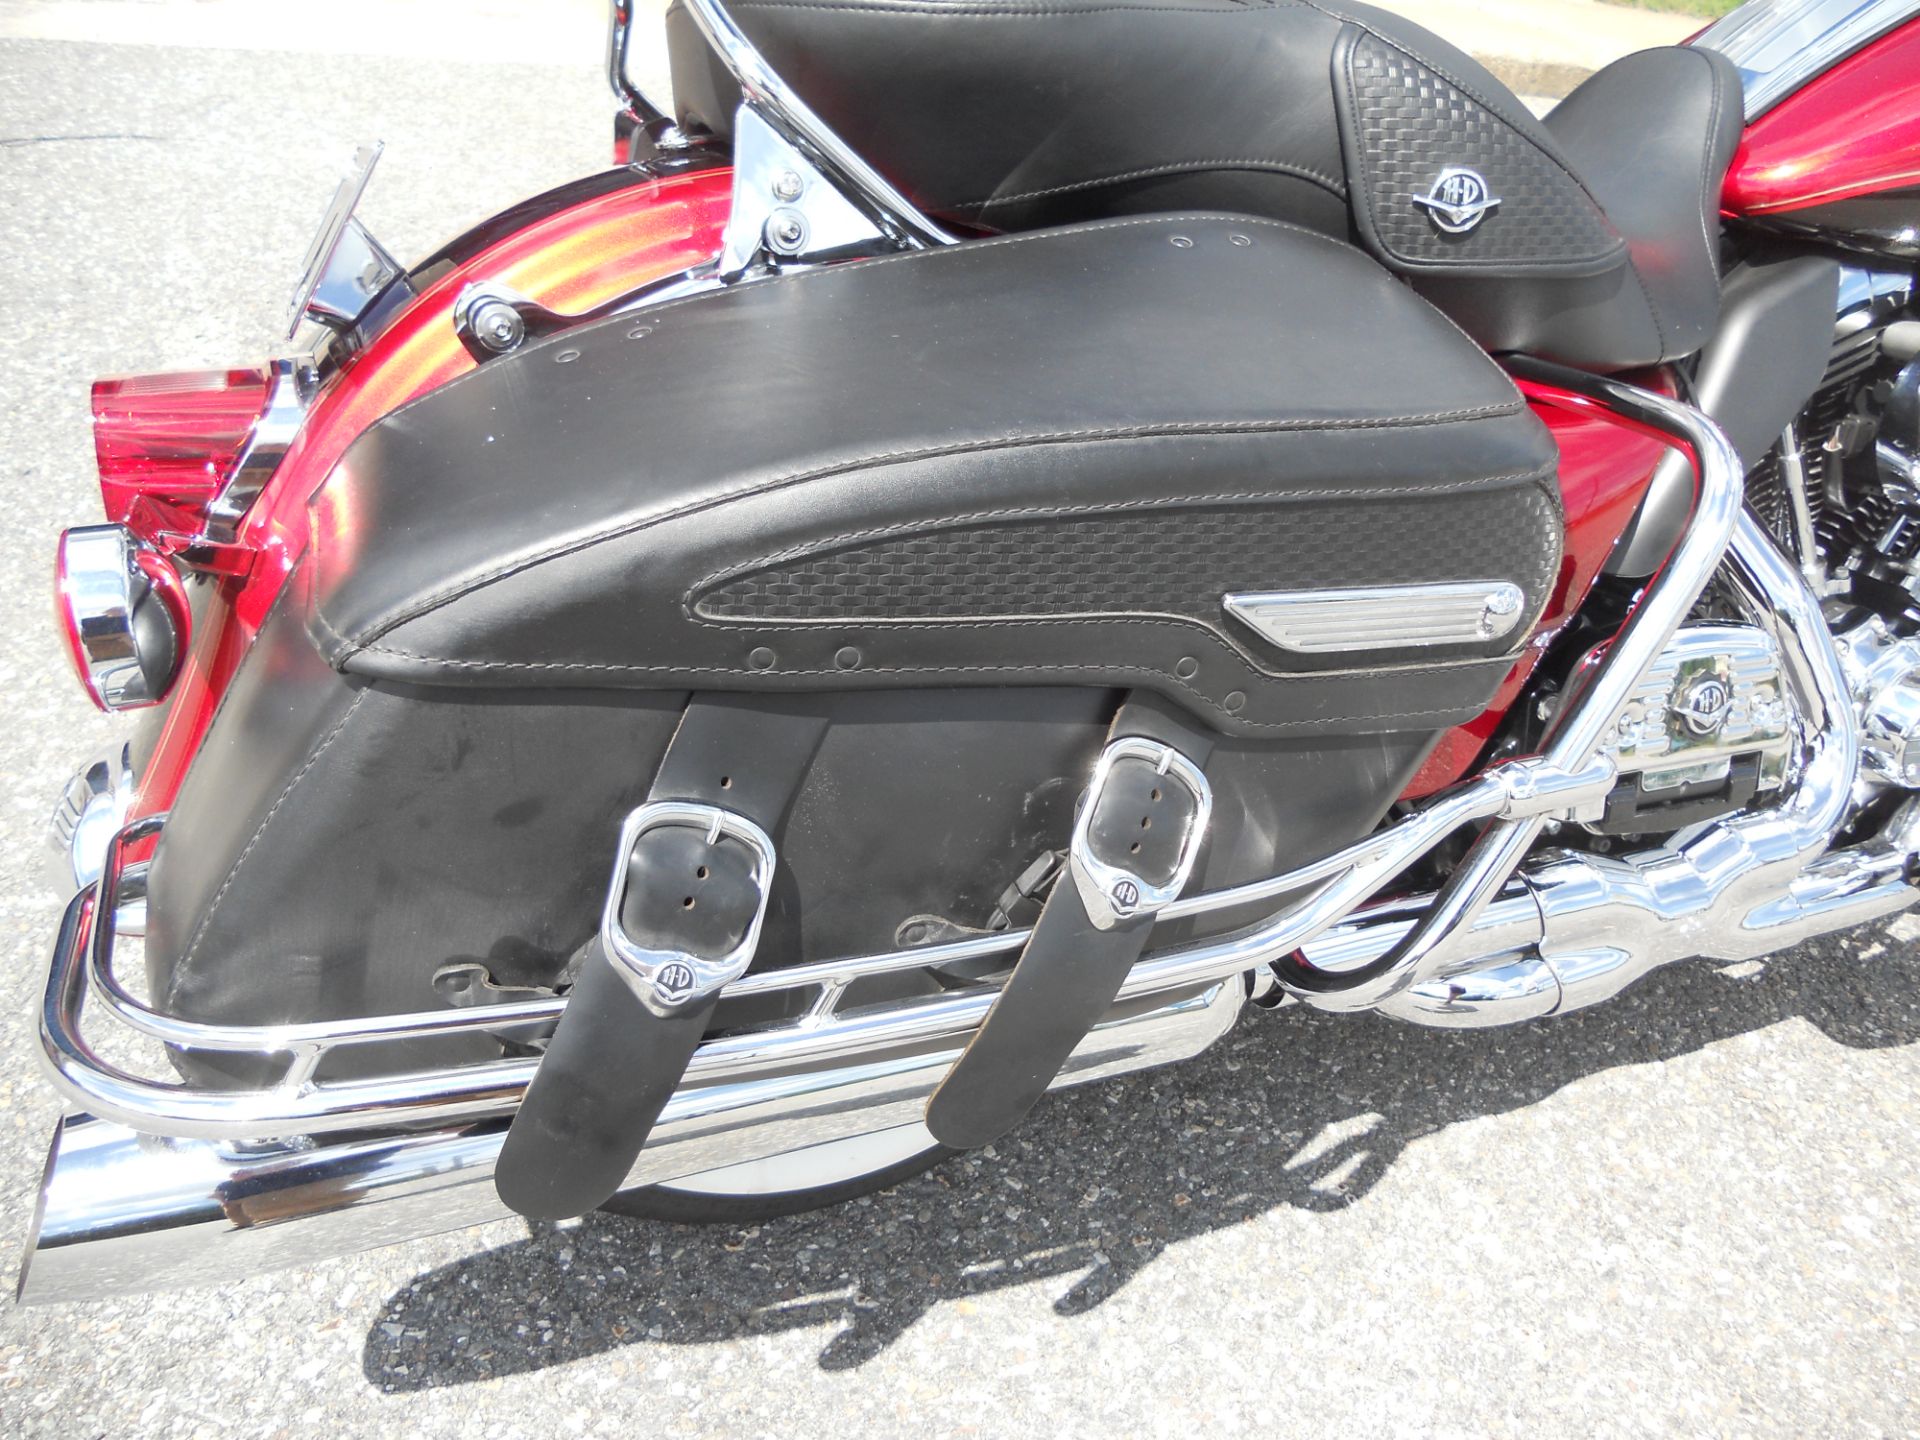 2013 Harley-Davidson Road King® Classic in Derry, New Hampshire - Photo 5